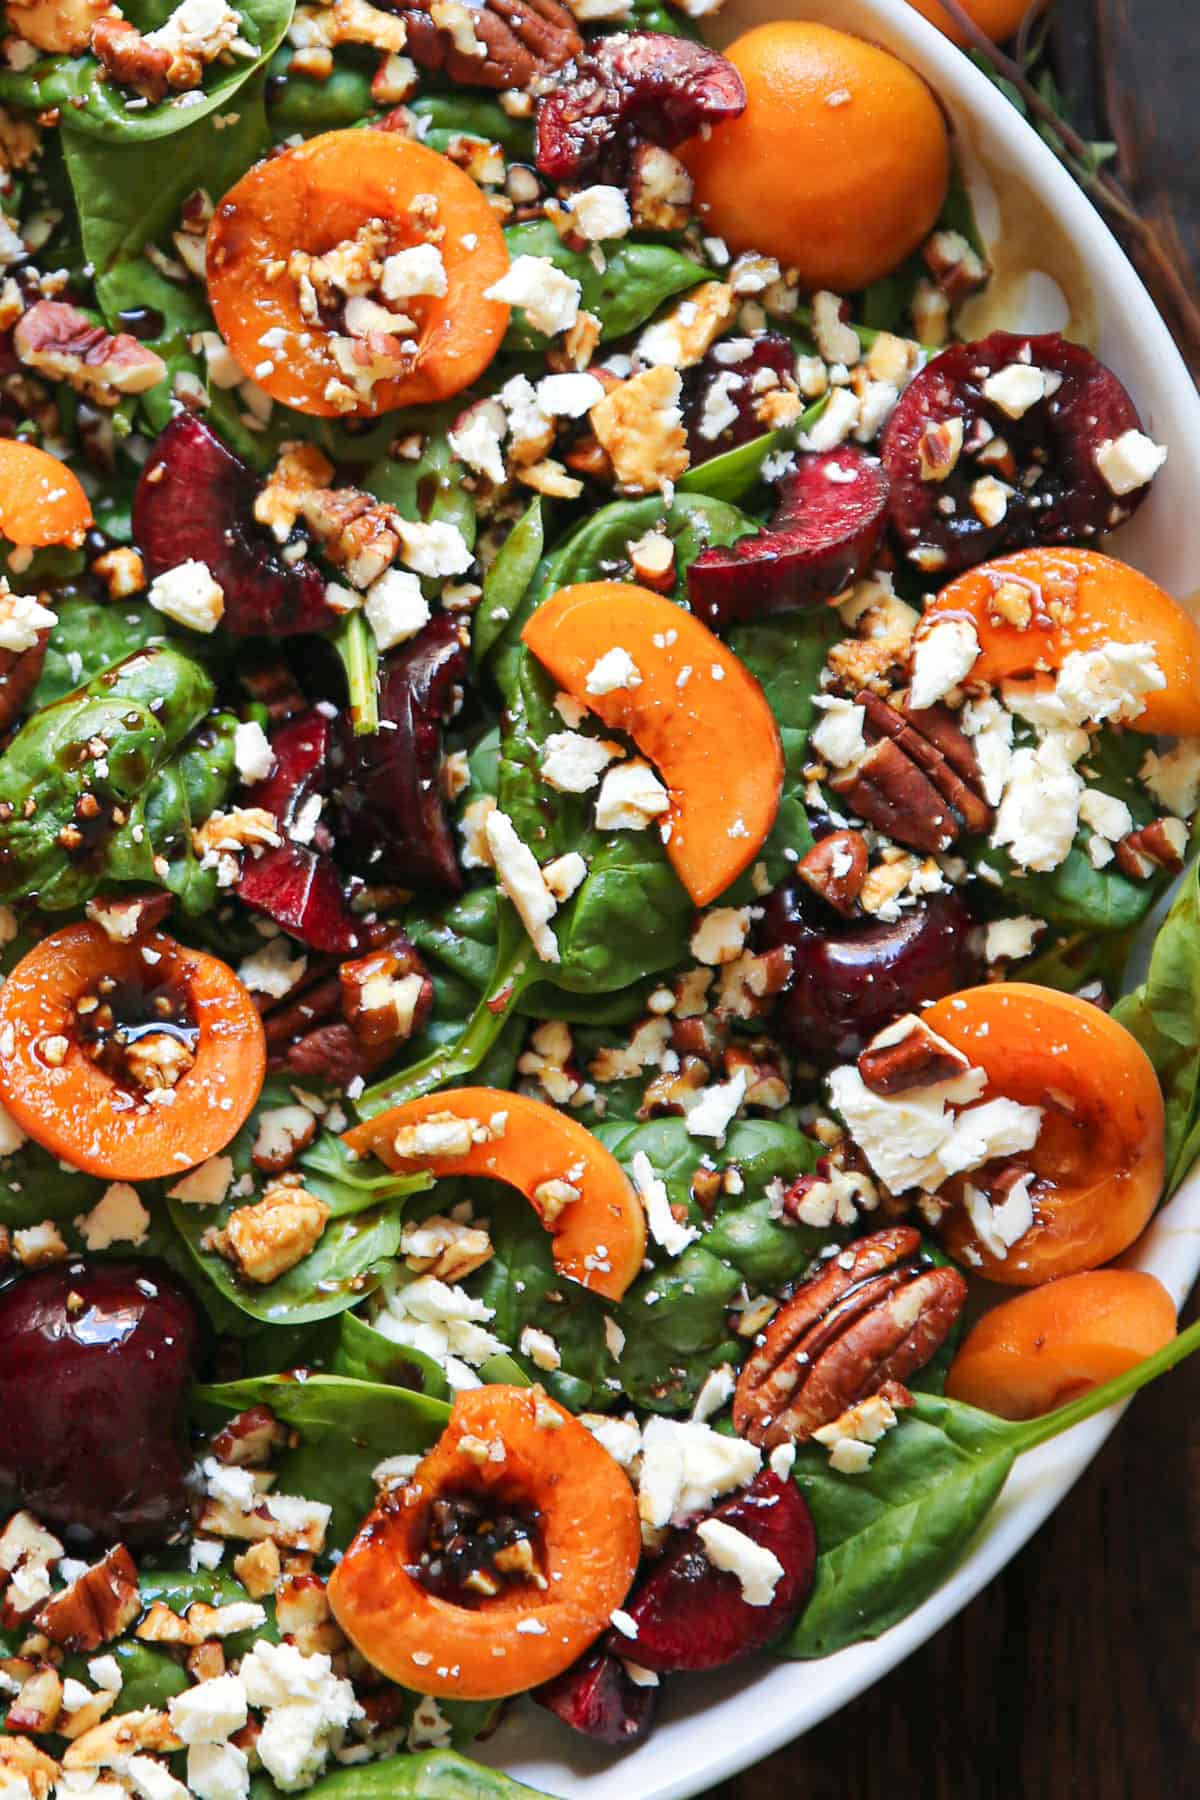 Apricot Salad with Spinach, Cherries, Pecans, Feta Cheese, and Balsamic Glaze - on a white plate.